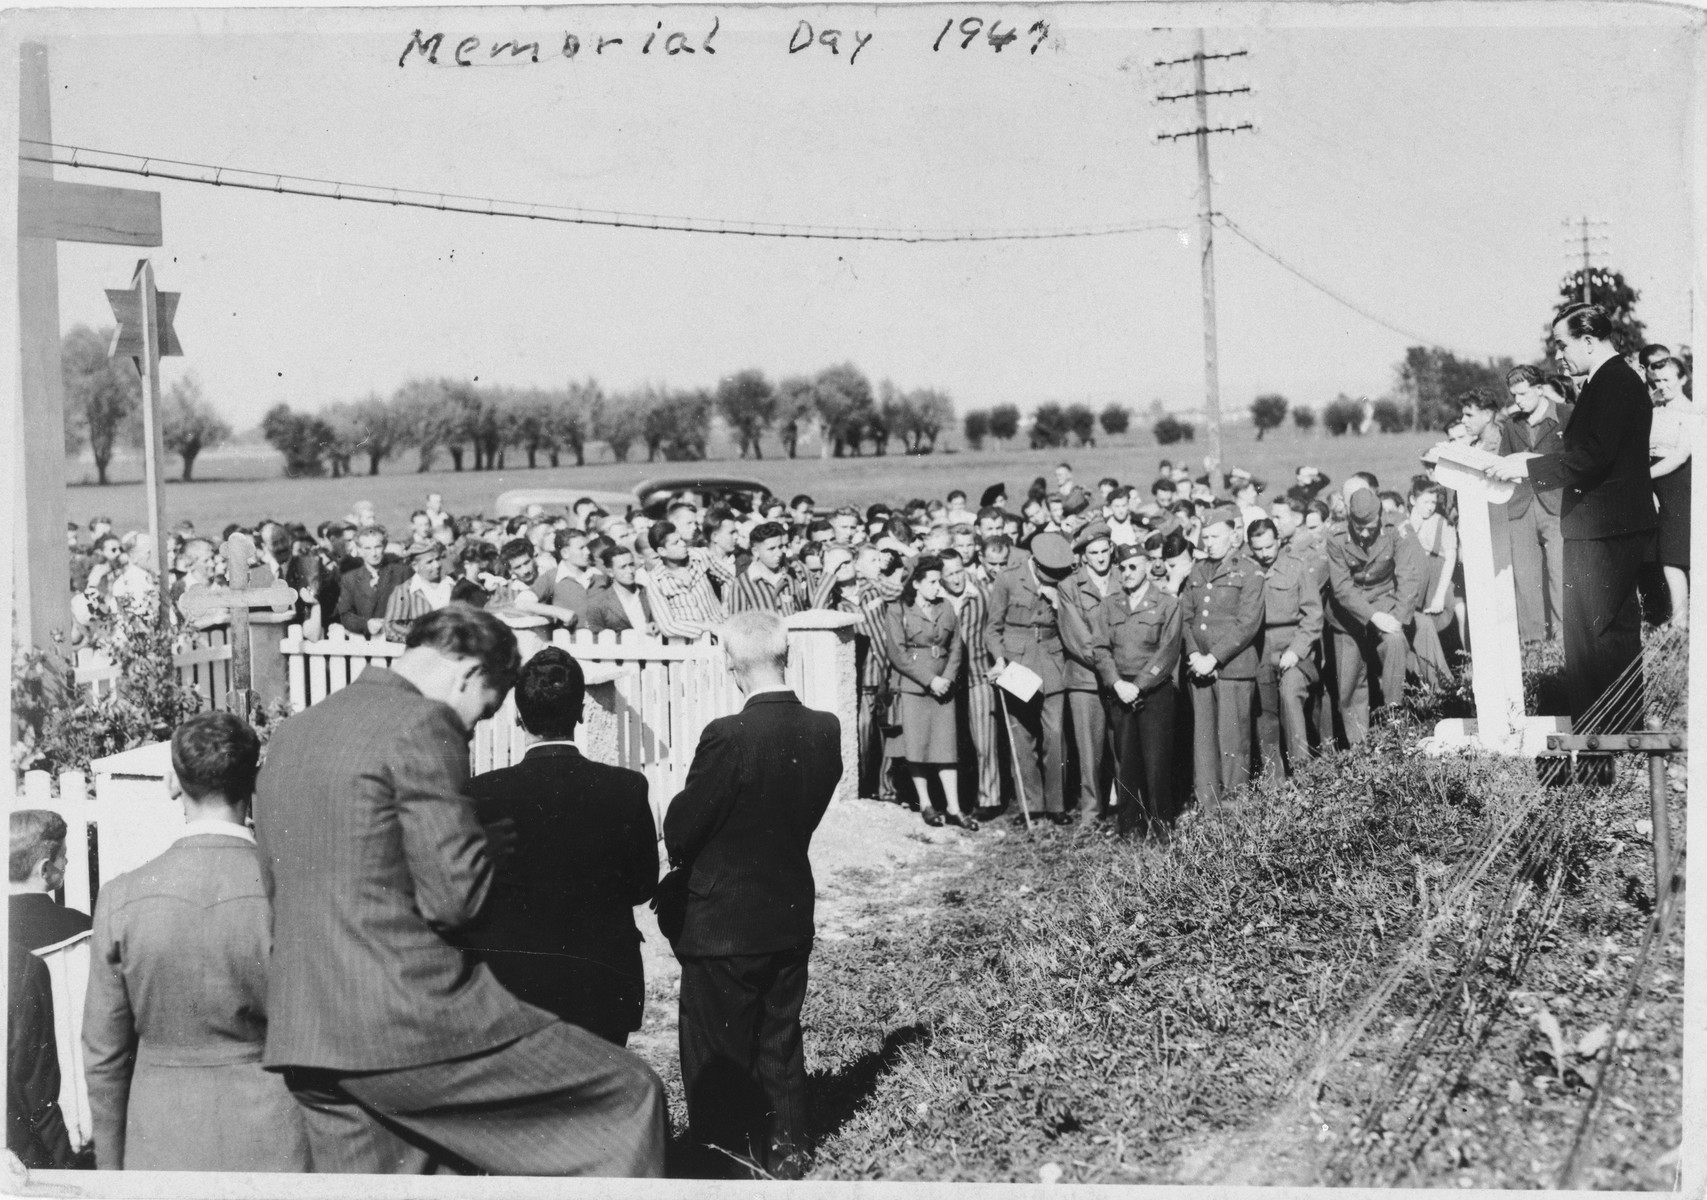 Jewish displaced persons gather for the dedication of a memorial at the site of the Pocking concentration camp.